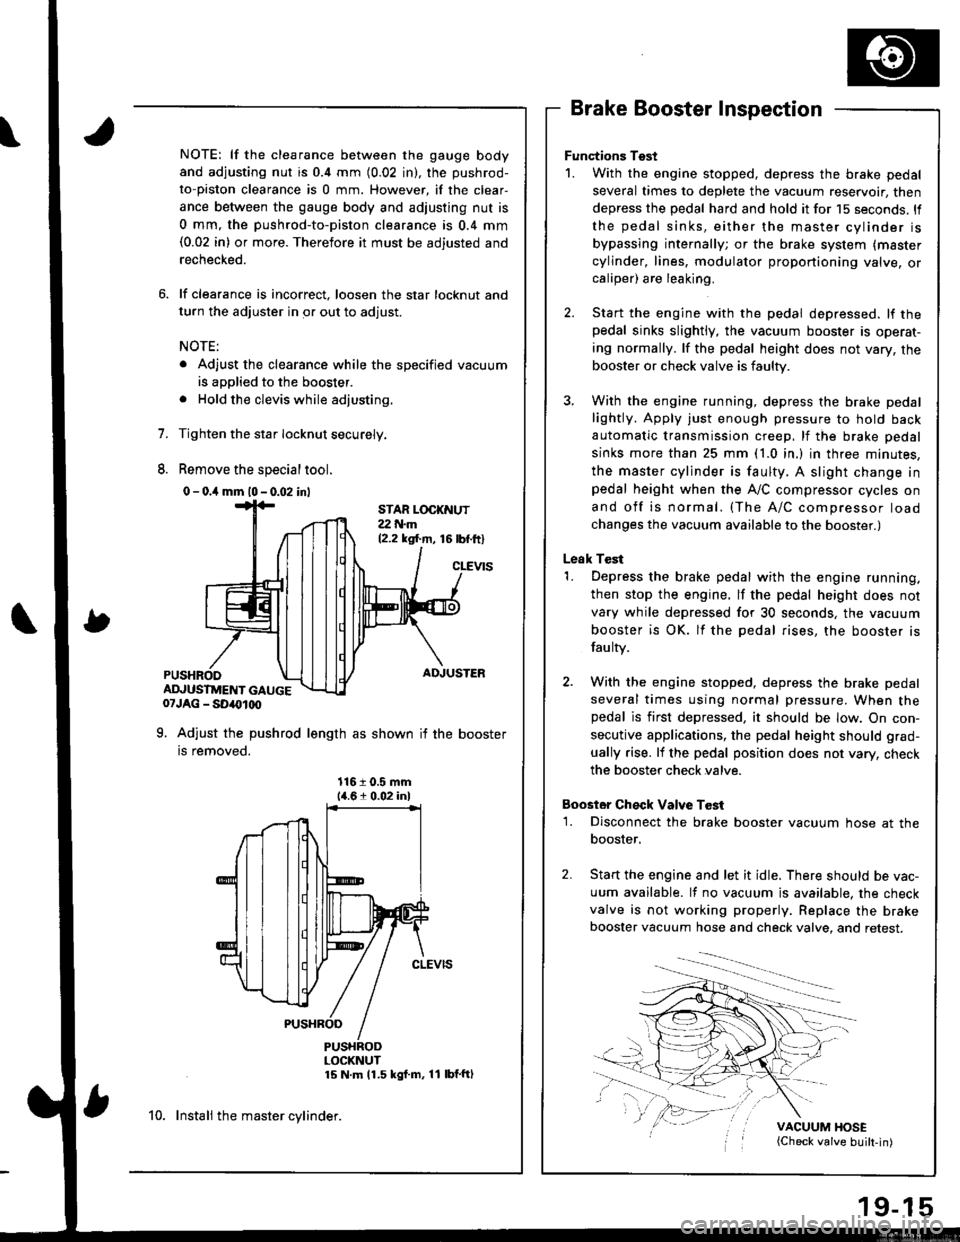 HONDA INTEGRA 1998 4.G Workshop Manual 1.
8.
NOTE: lf the clearance between the gauge body
and adjusting nut is 0.4 mm (0.02 in), the pushrod-
to-piston clearance is 0 mm. However, if the clear-
ance between the gauge body and adjusting nu